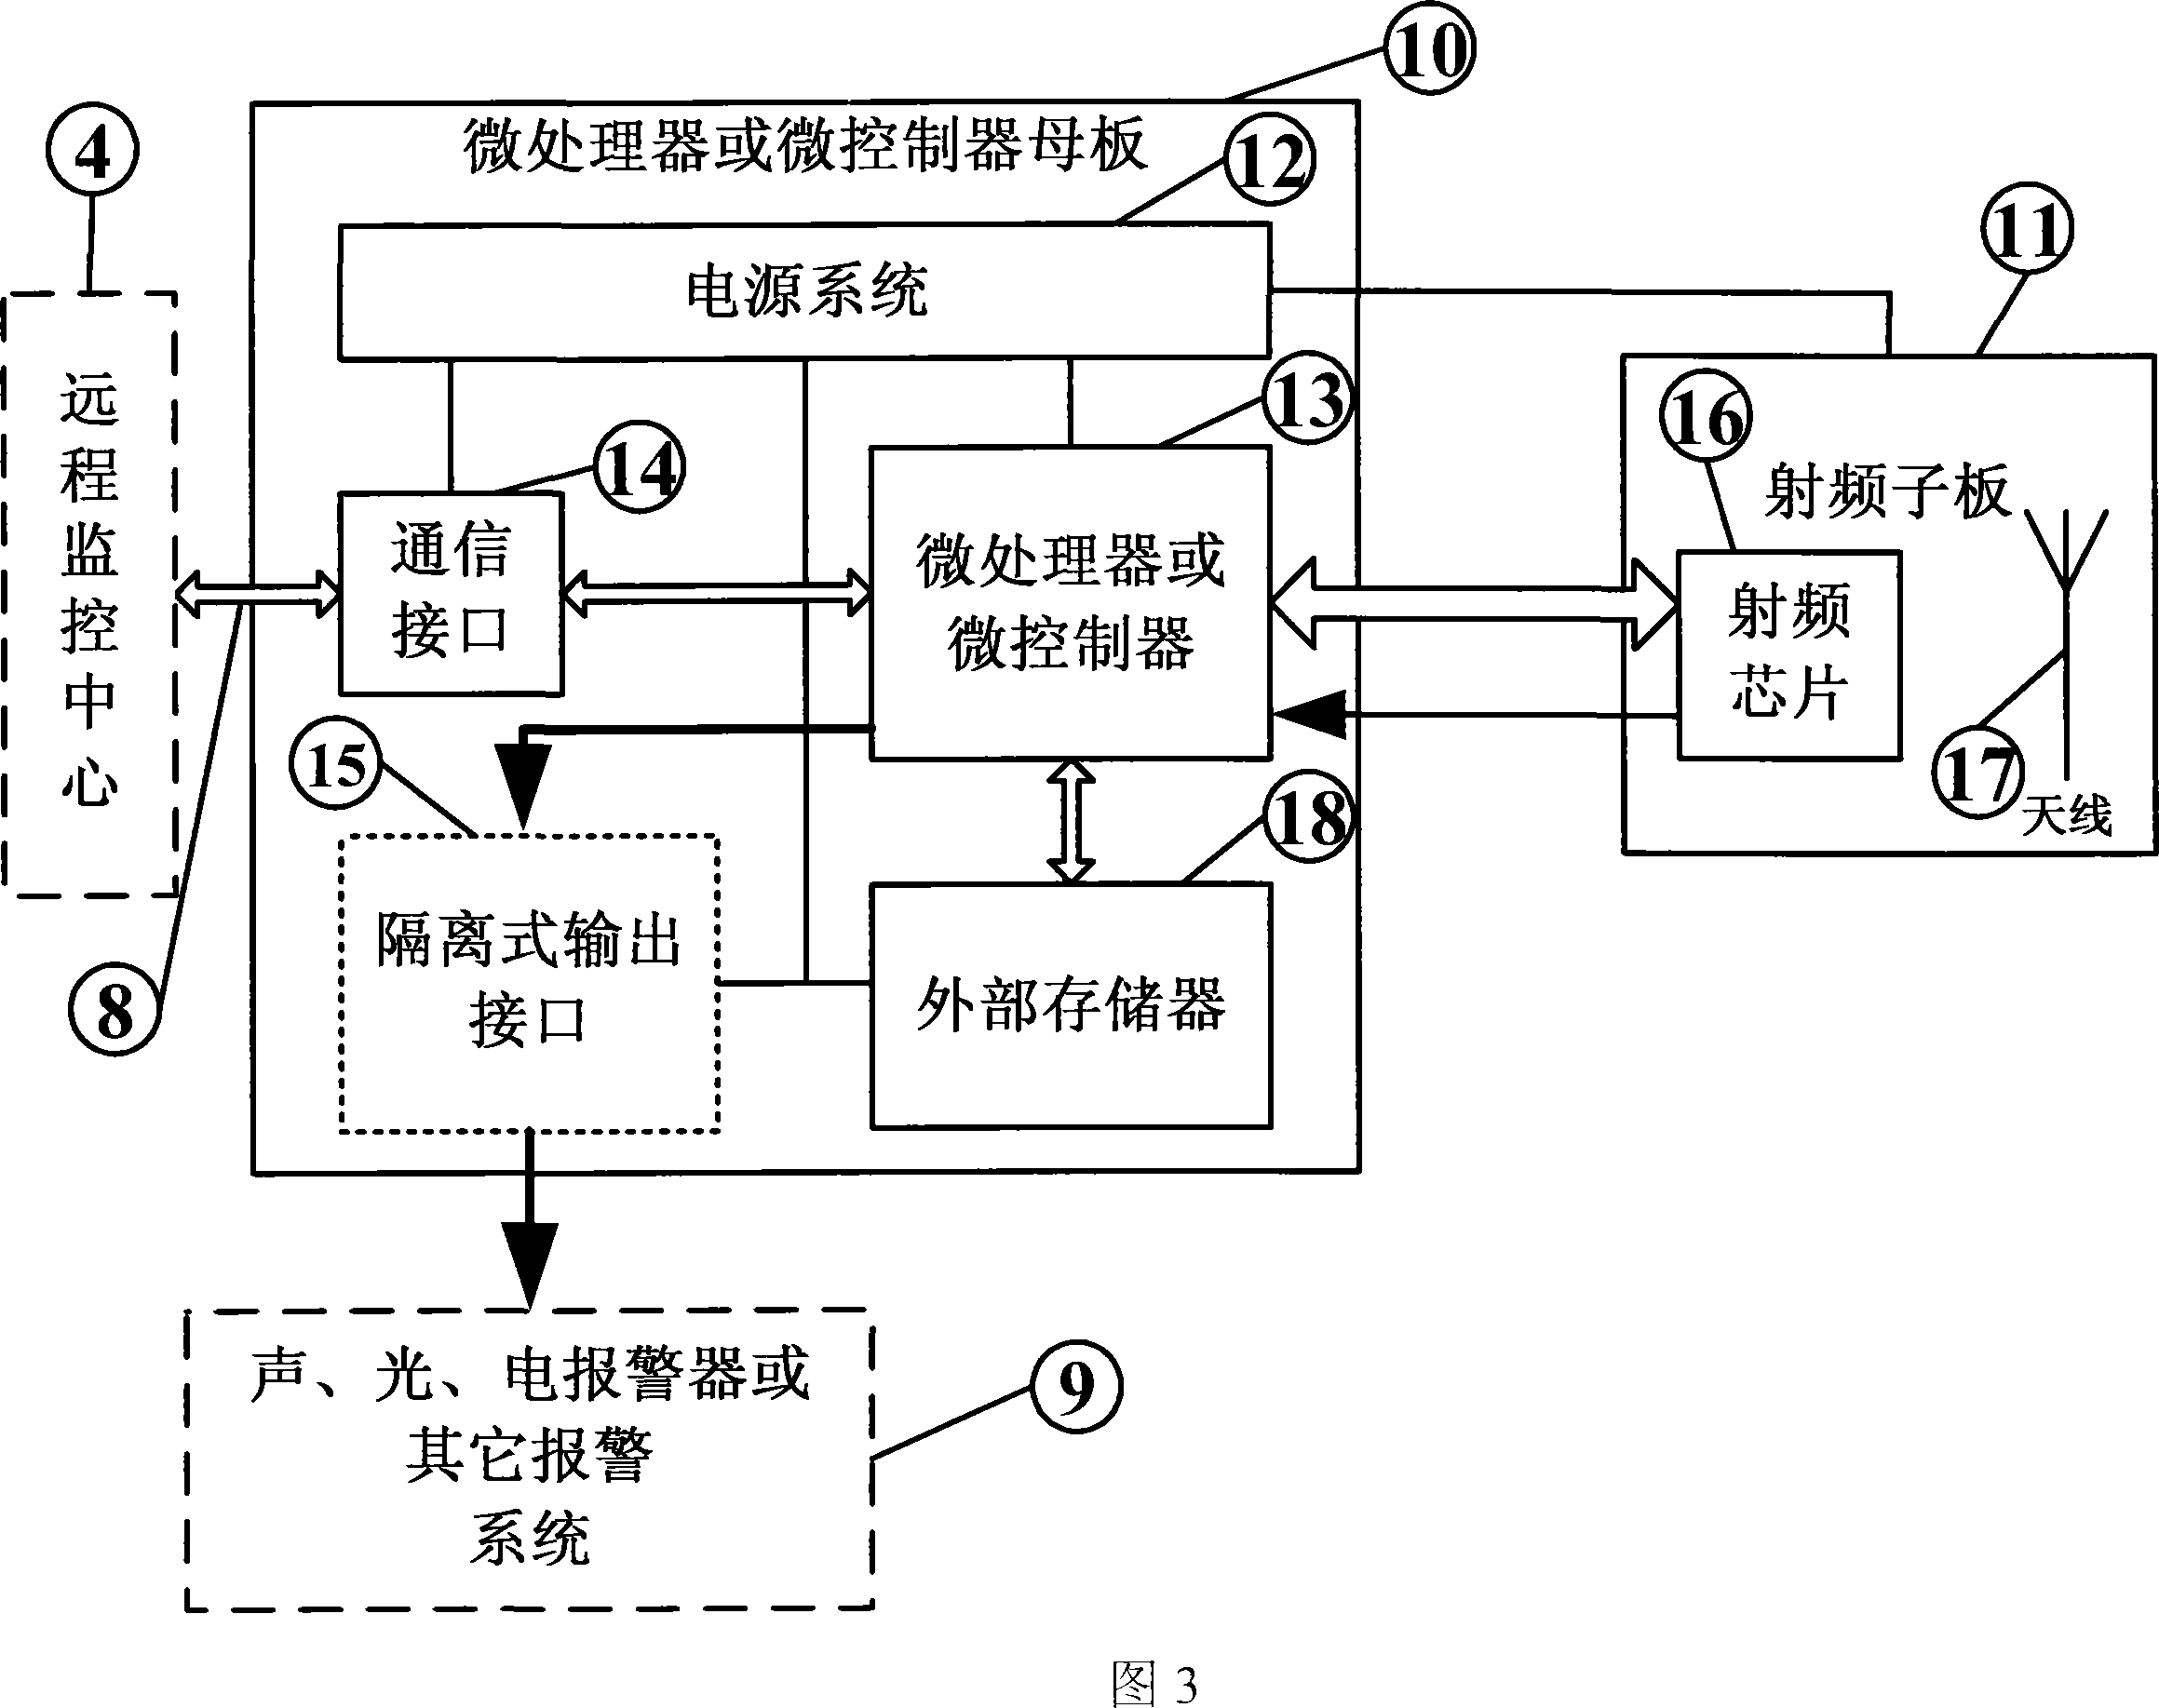 Intrusion detection system and method